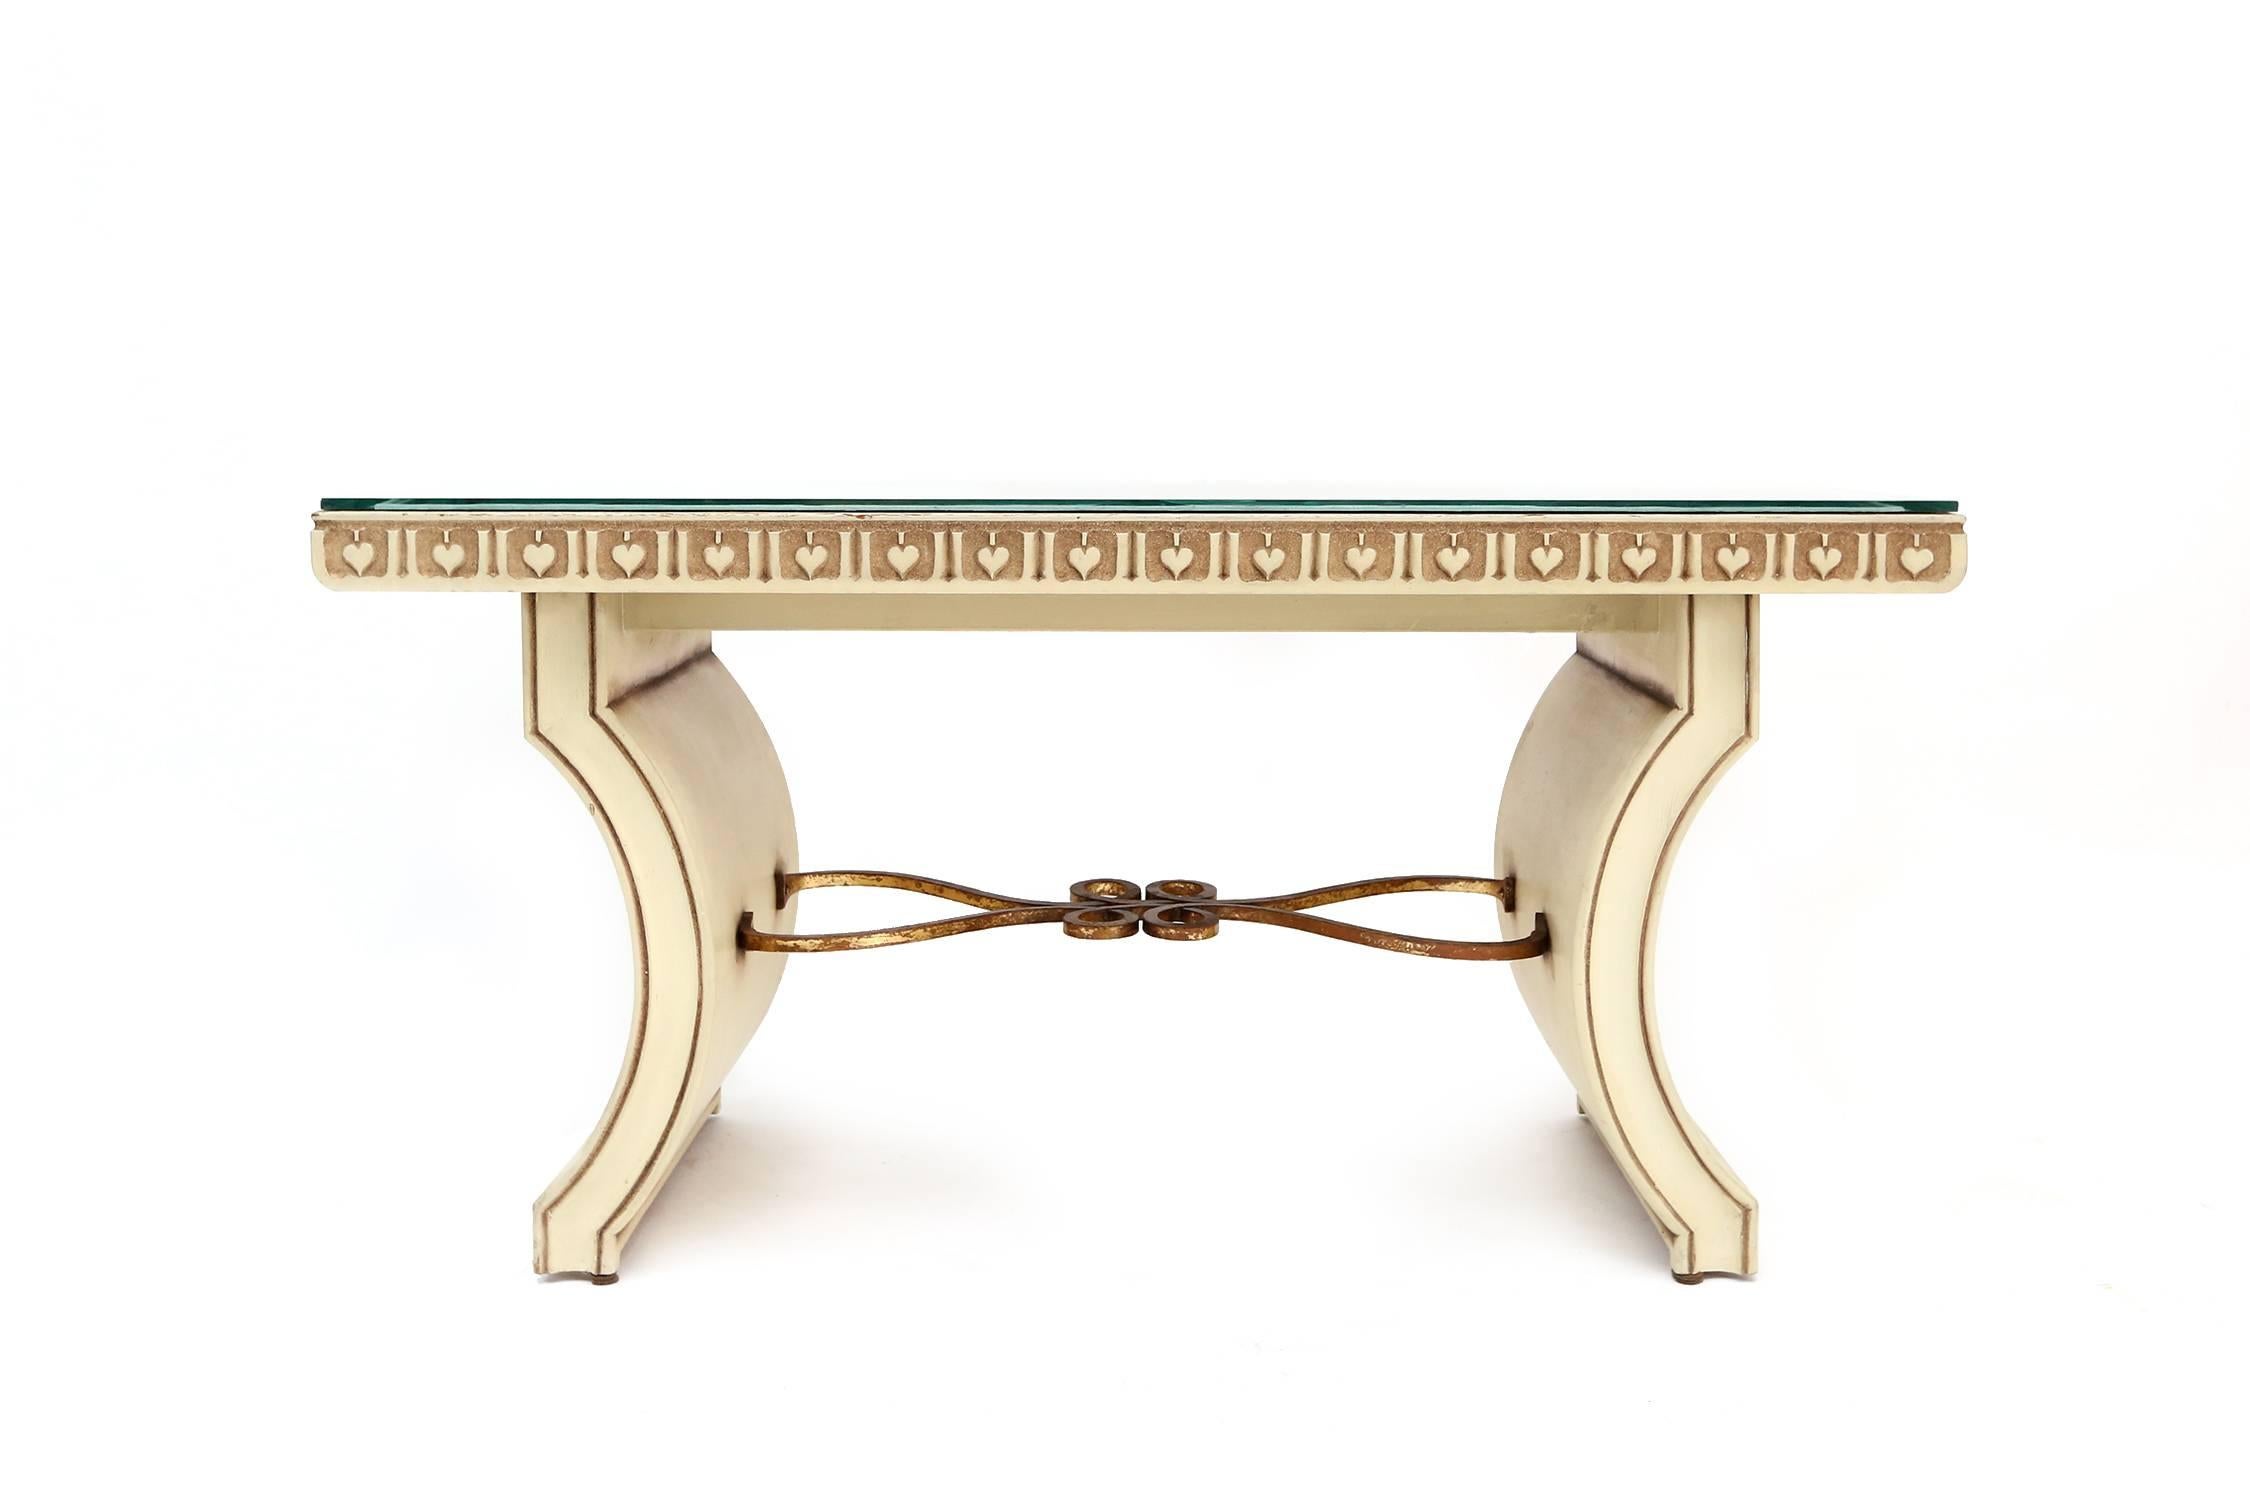 Ivory lacquered coffee table, Art Deco.
Gilded wrought iron,
France, circa 1930.
Measures: L 120 cm, H 59 cm, D 52 cm.